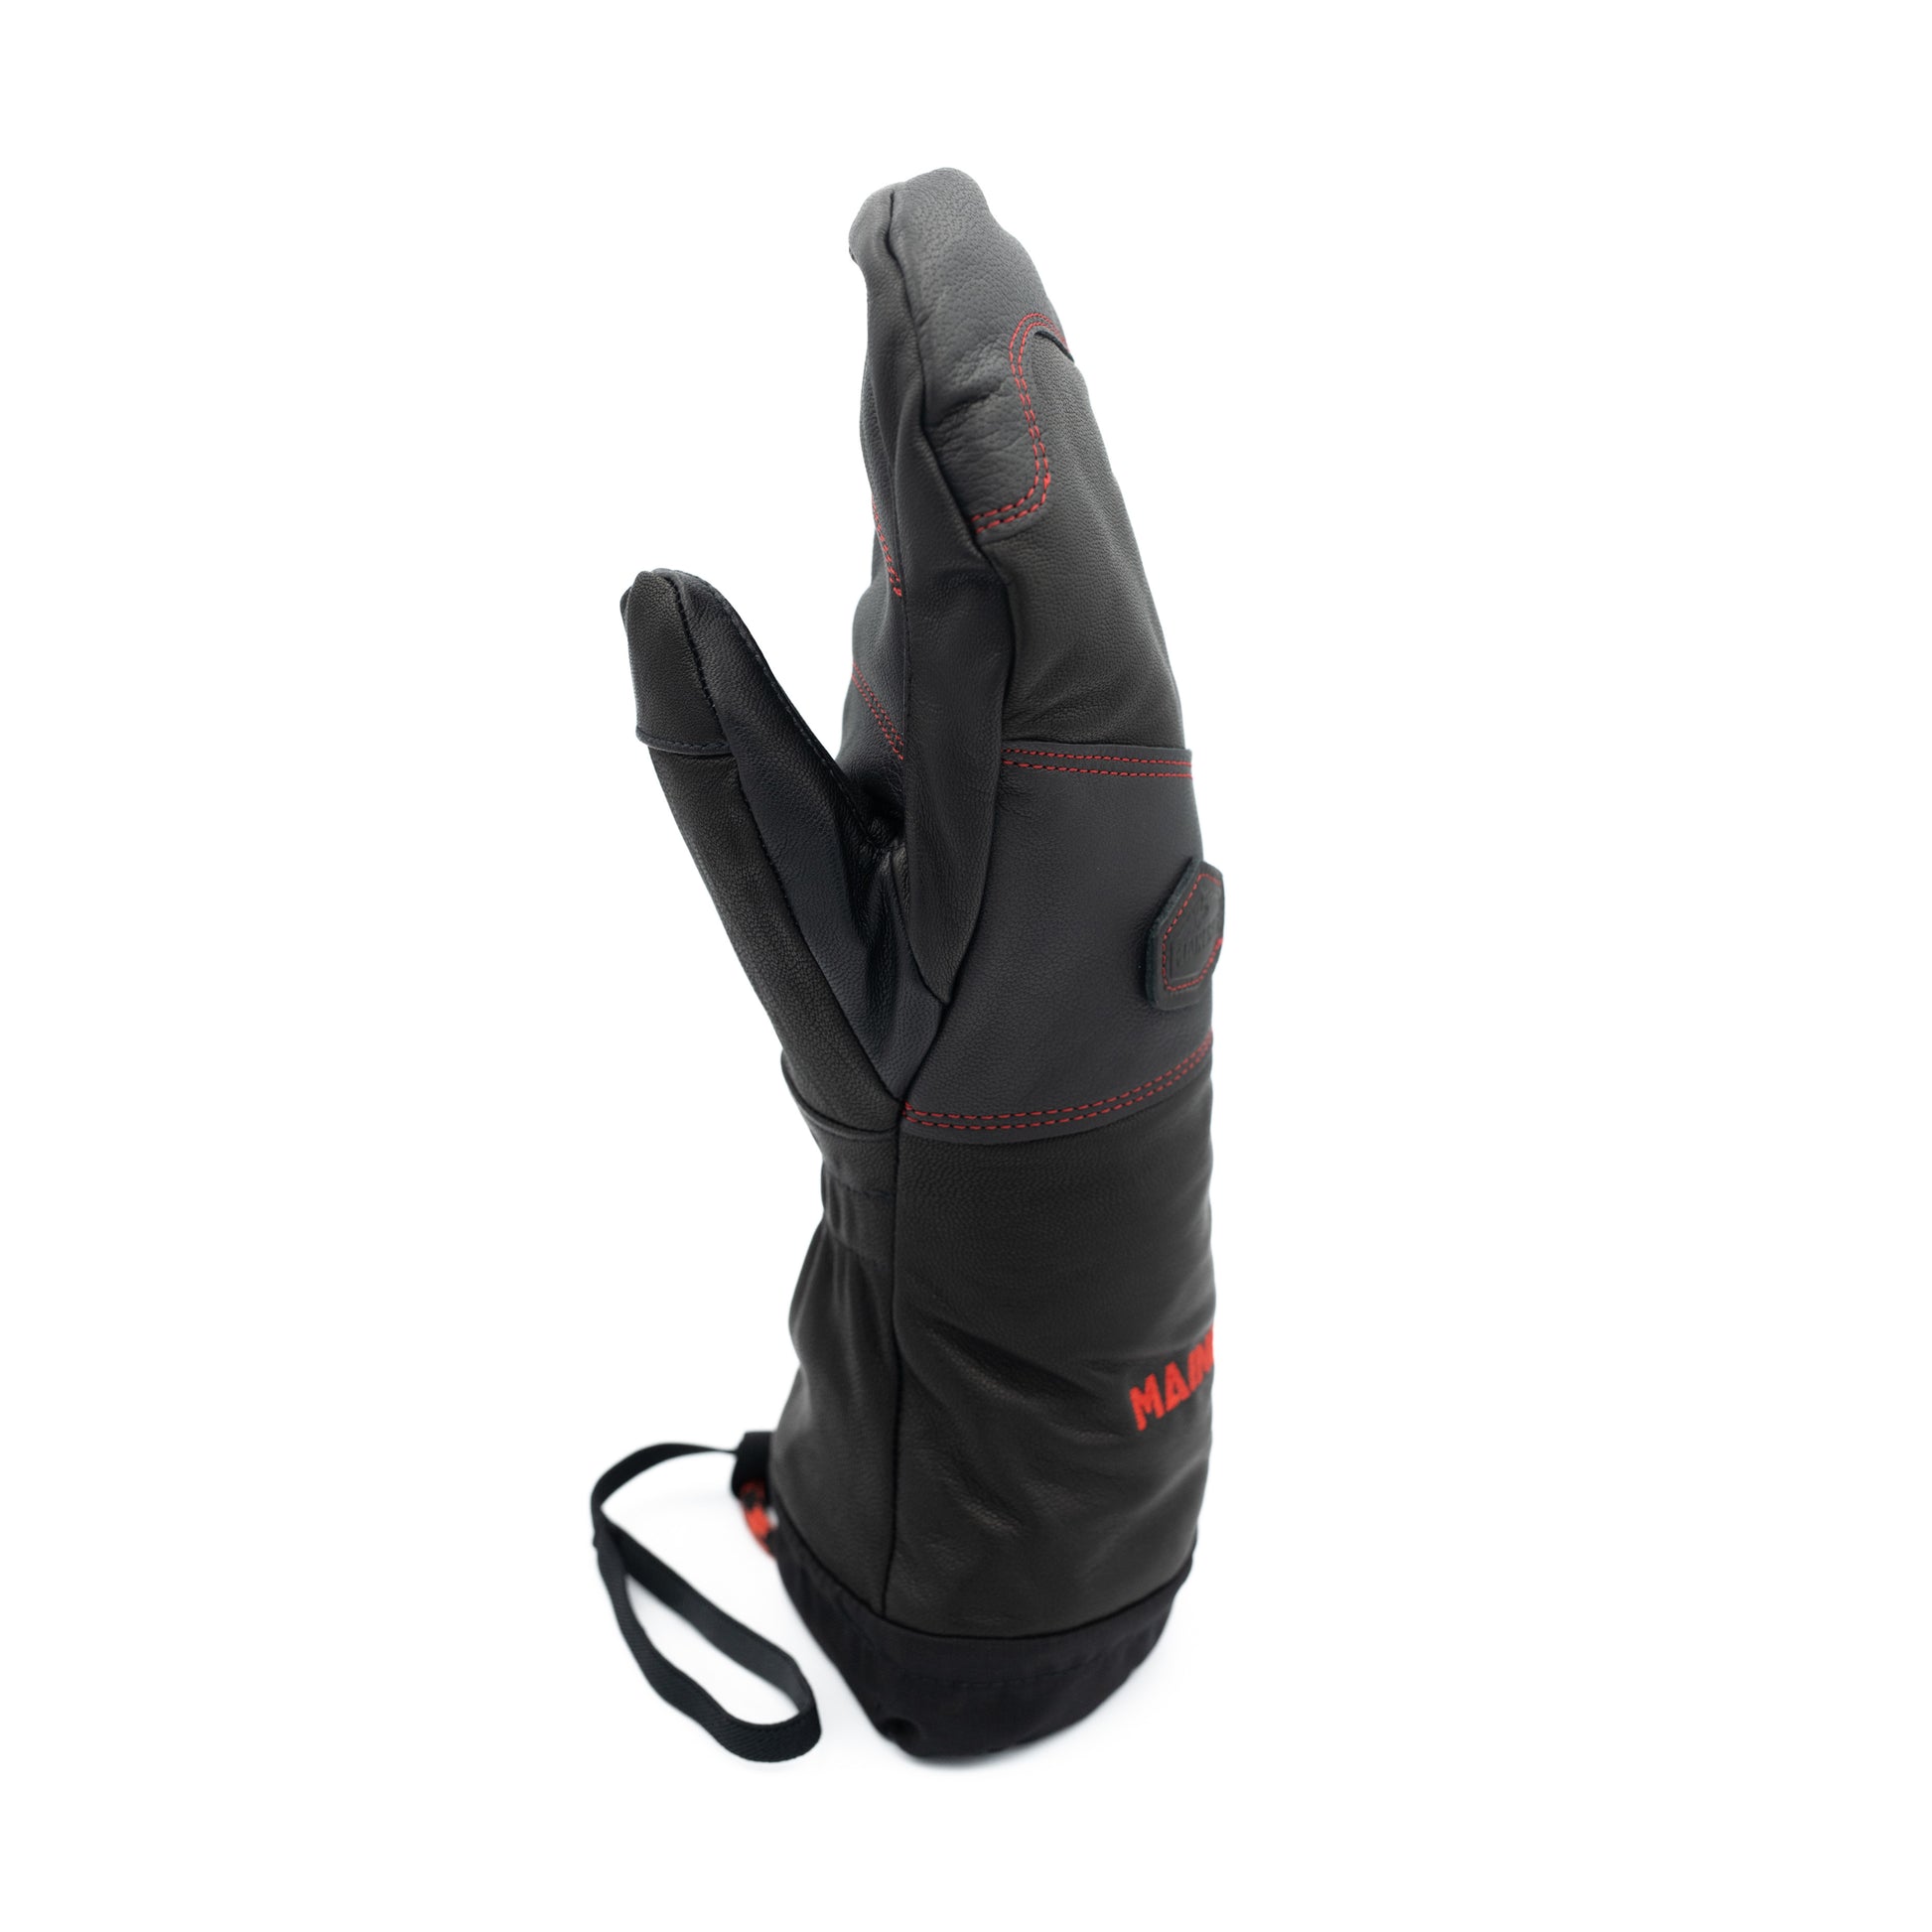 A Mainers black leather glove with red text.